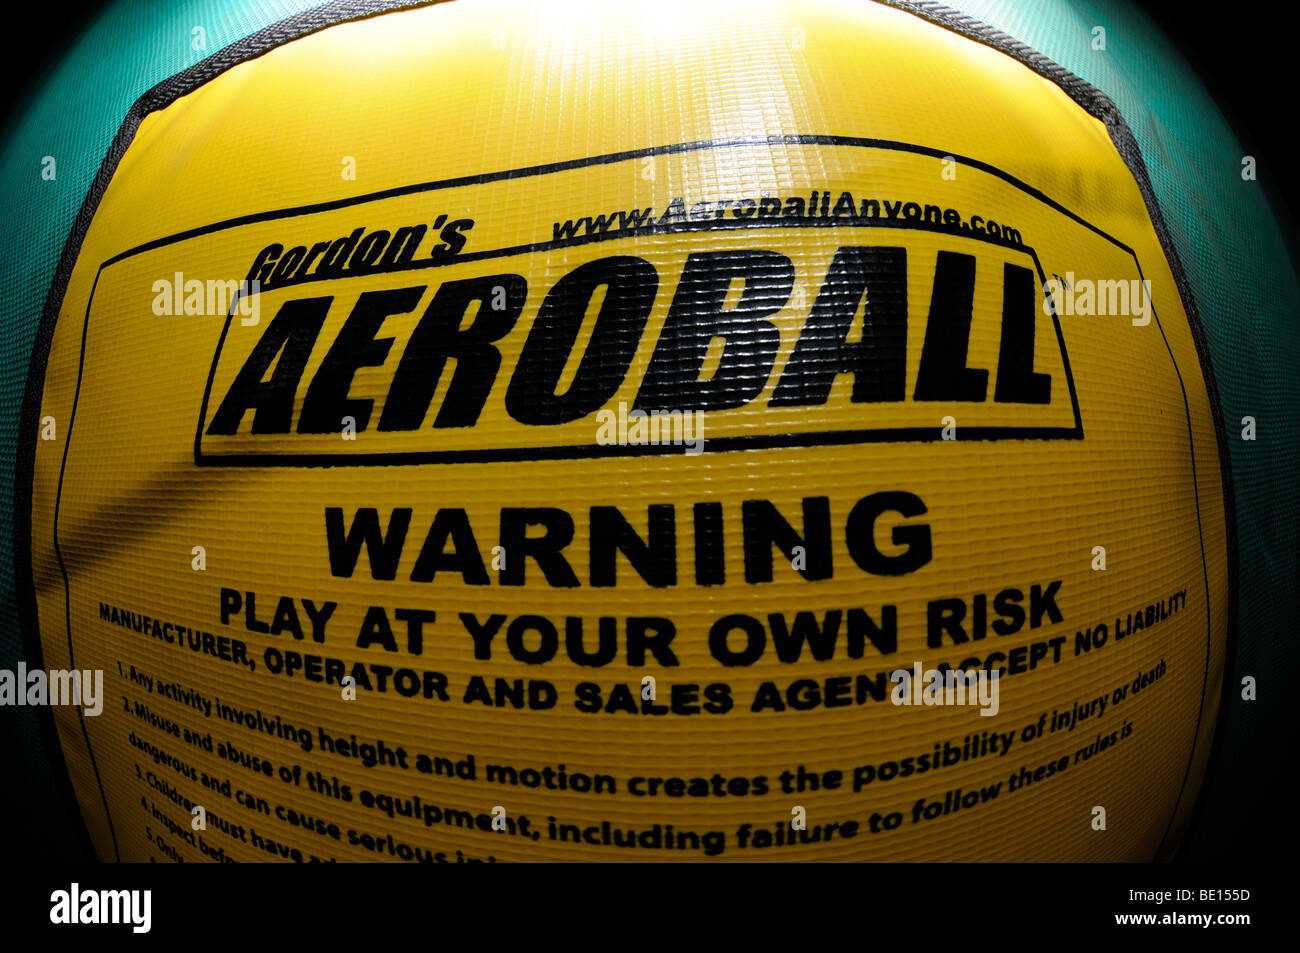 Aeroball safety warning sign, 'Play at your own risk'. Stock Photo